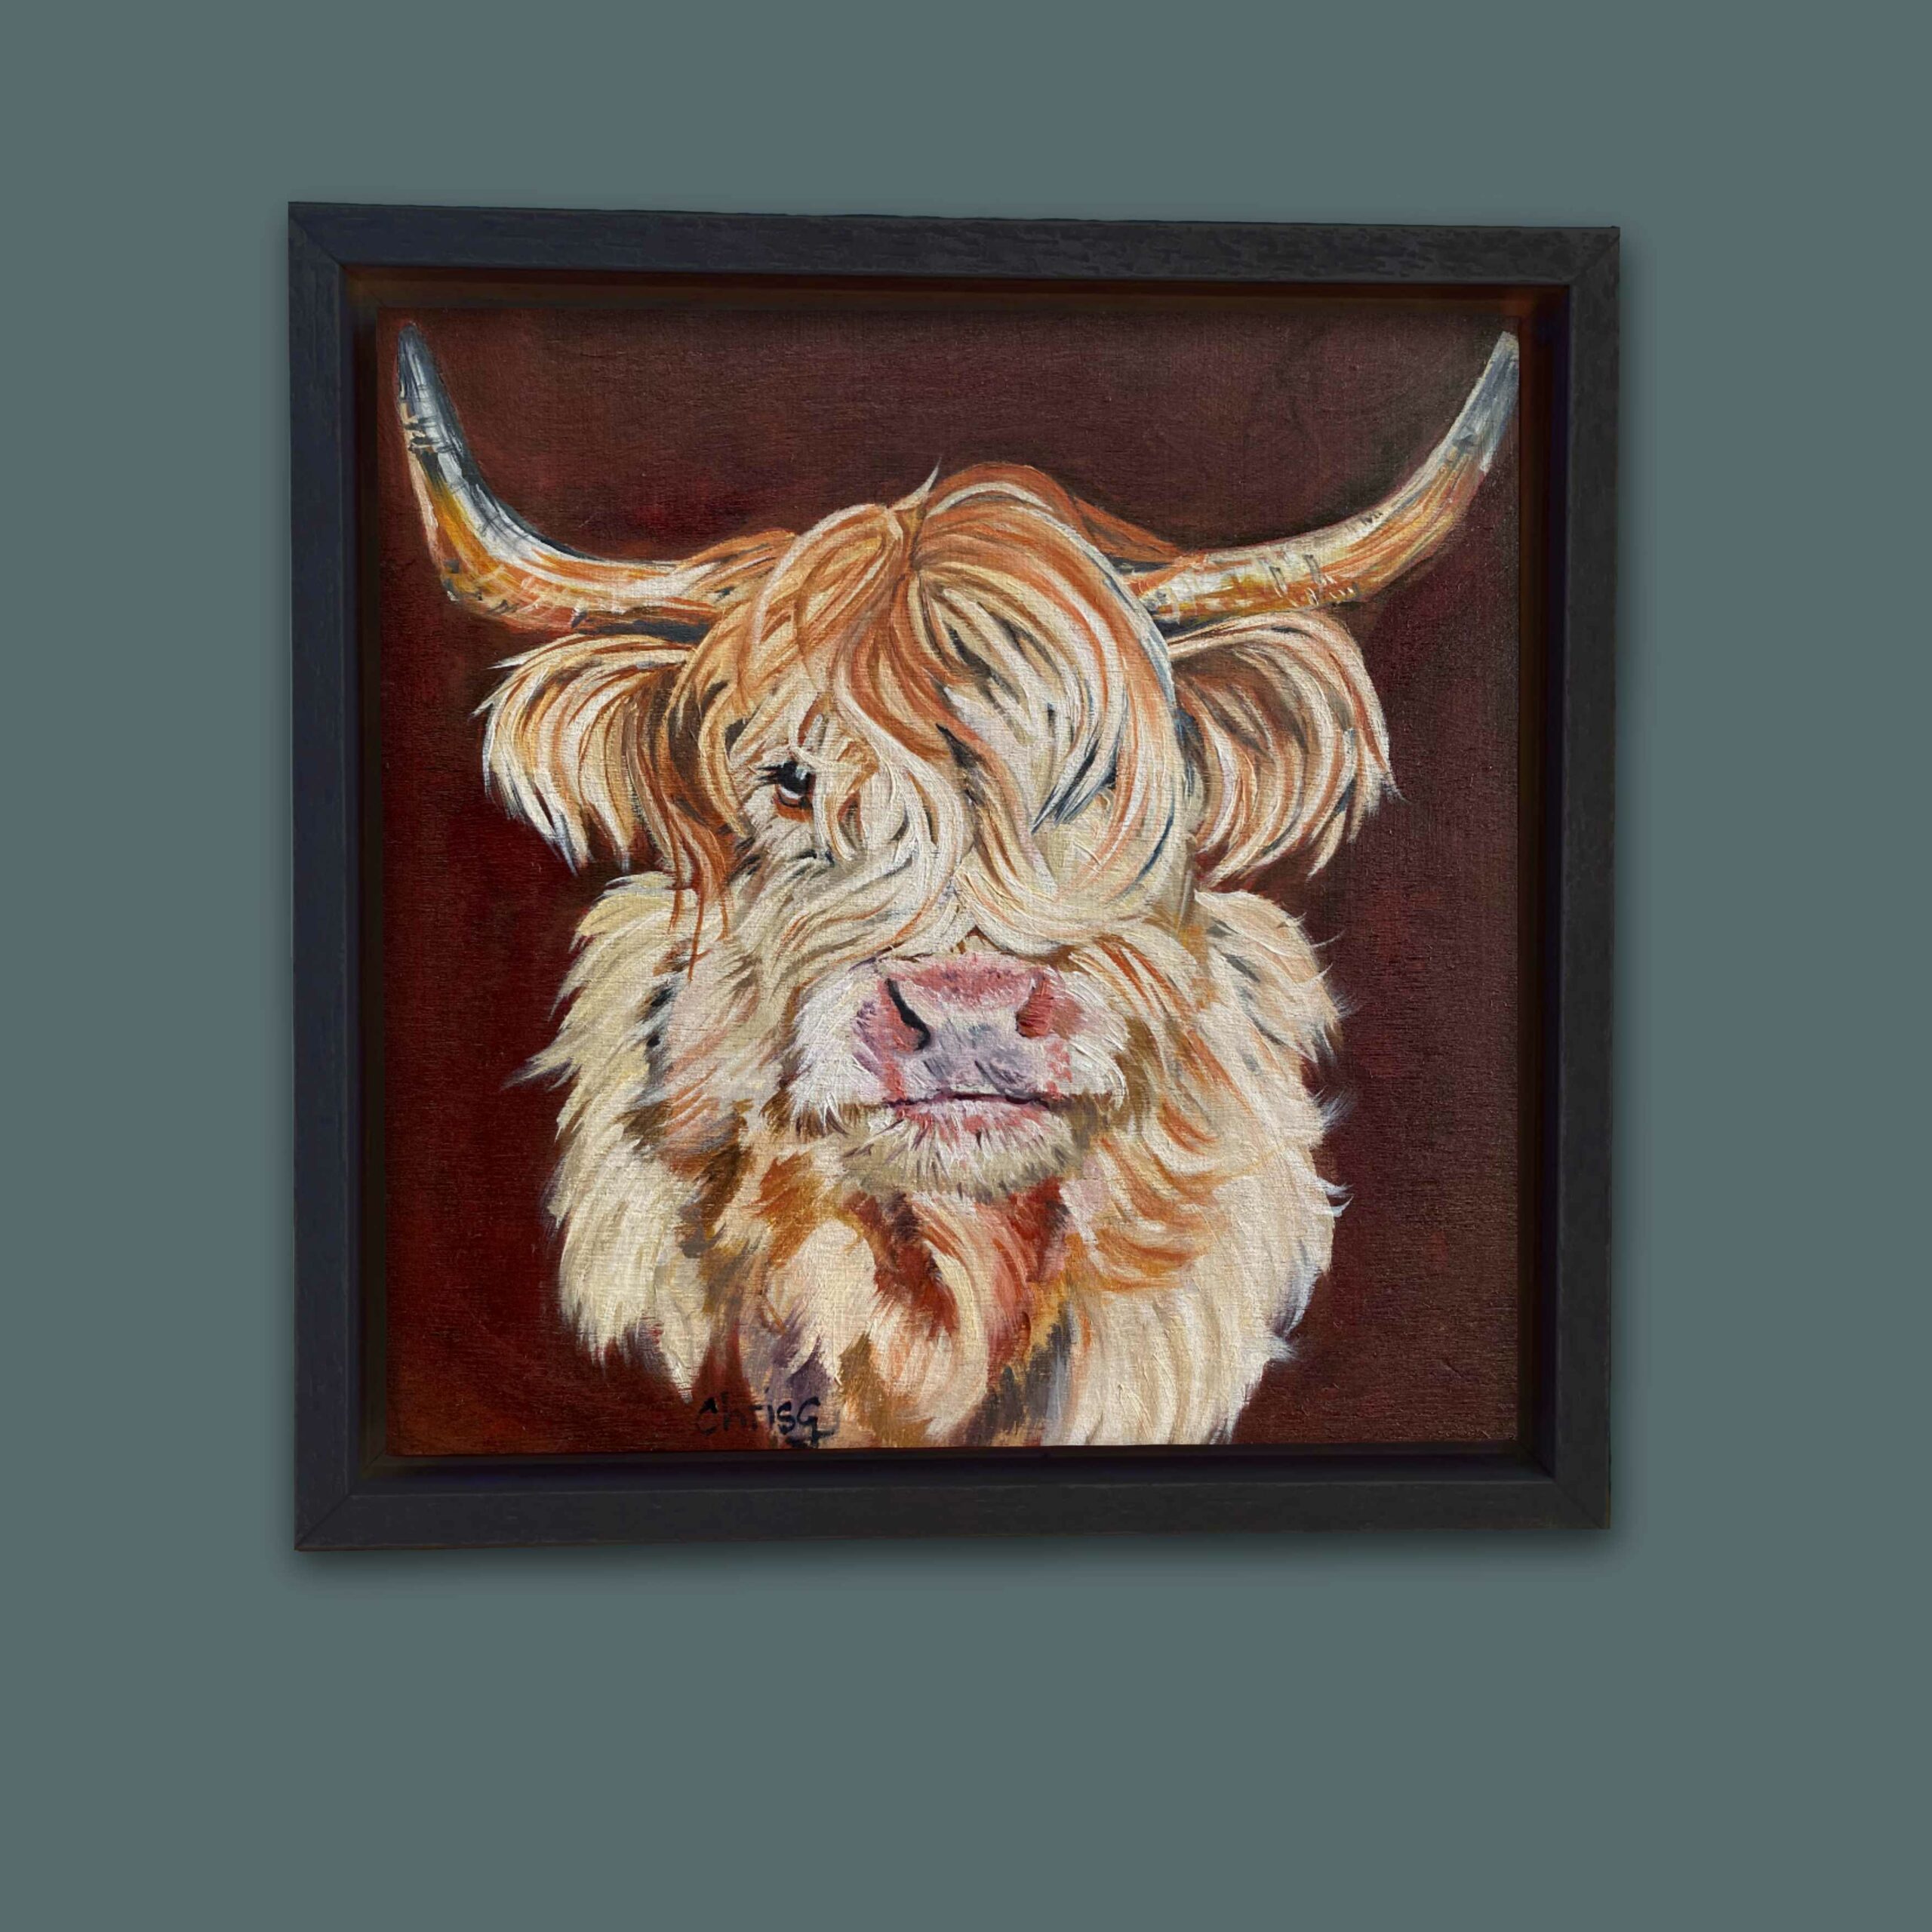 Canvas print of Rosie highland cow in a black floating frame